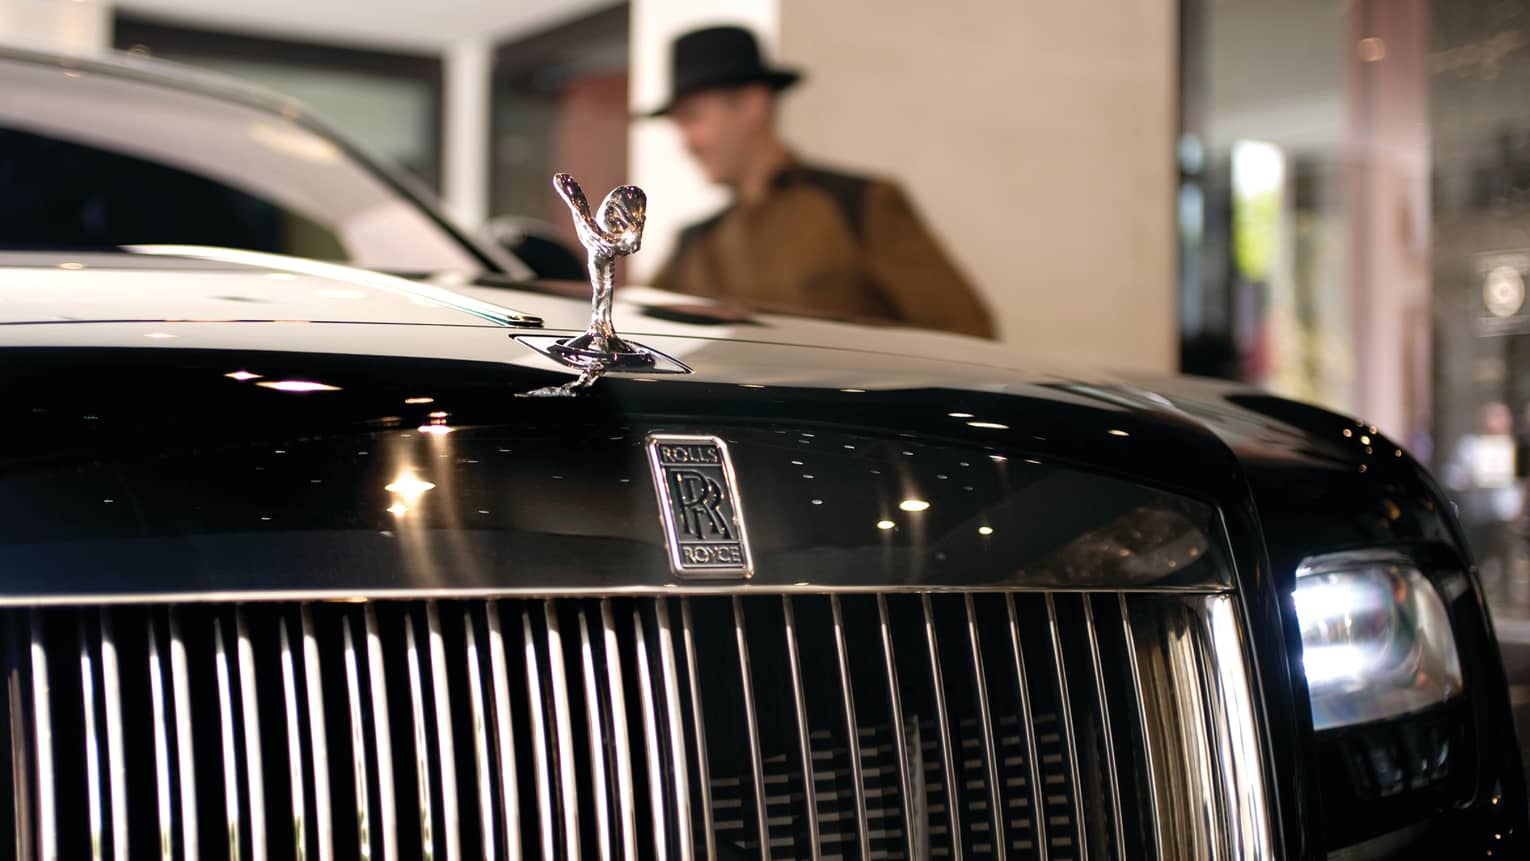 Close-up of Rolls Royce luxury car front grill, man in top hat in background